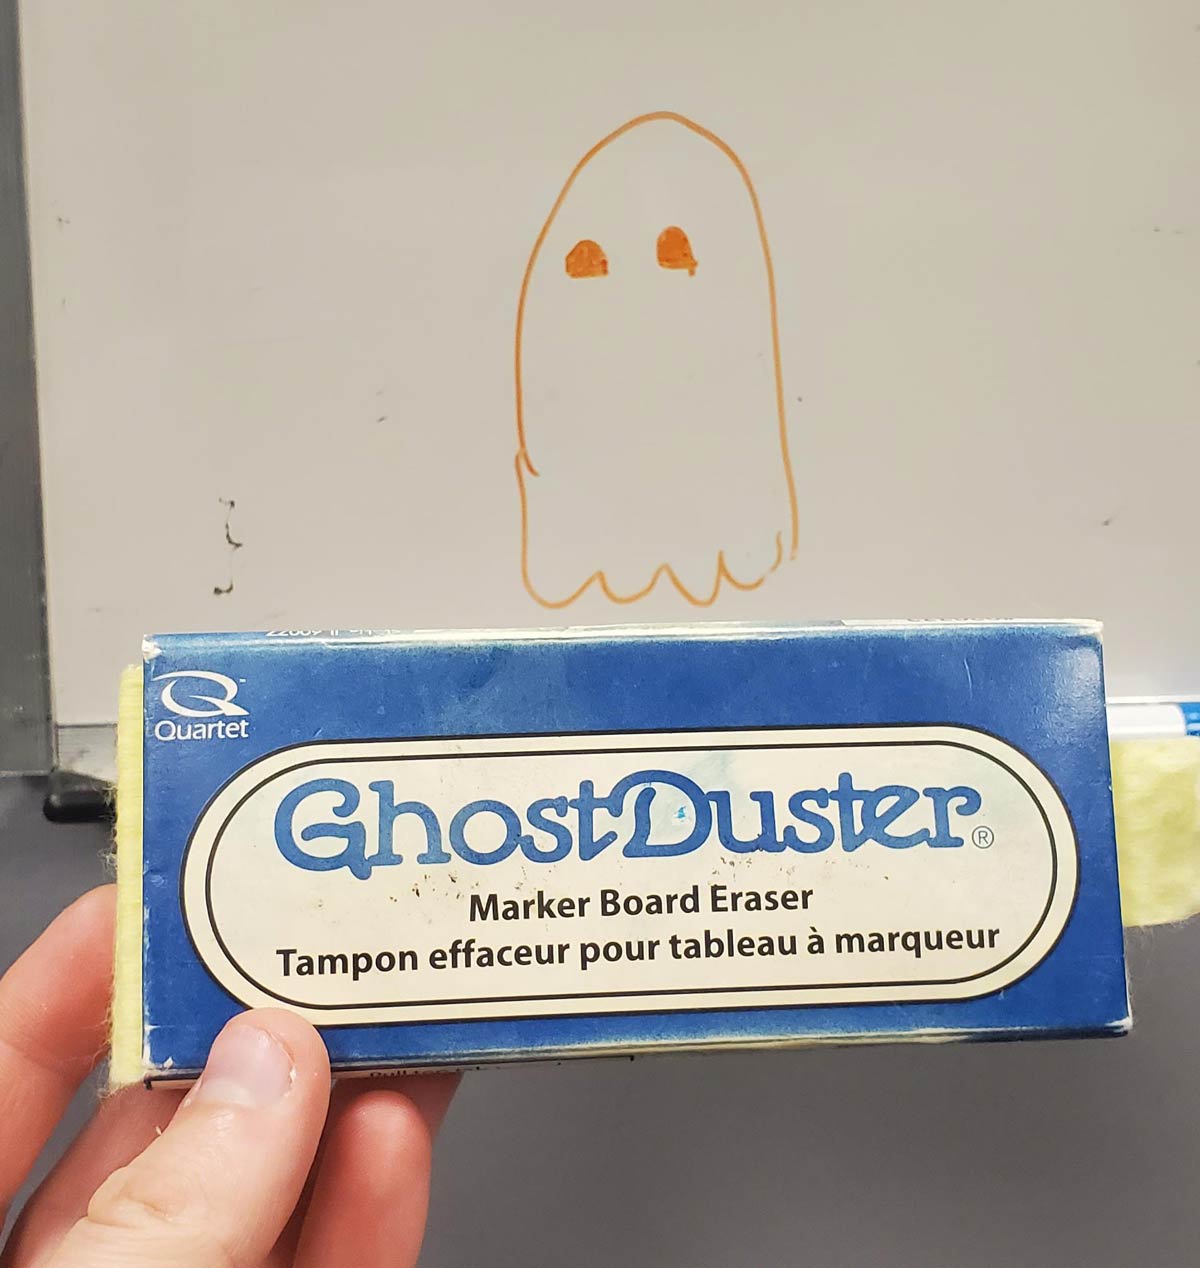 Haunted whiteboard? Who you gonna call?